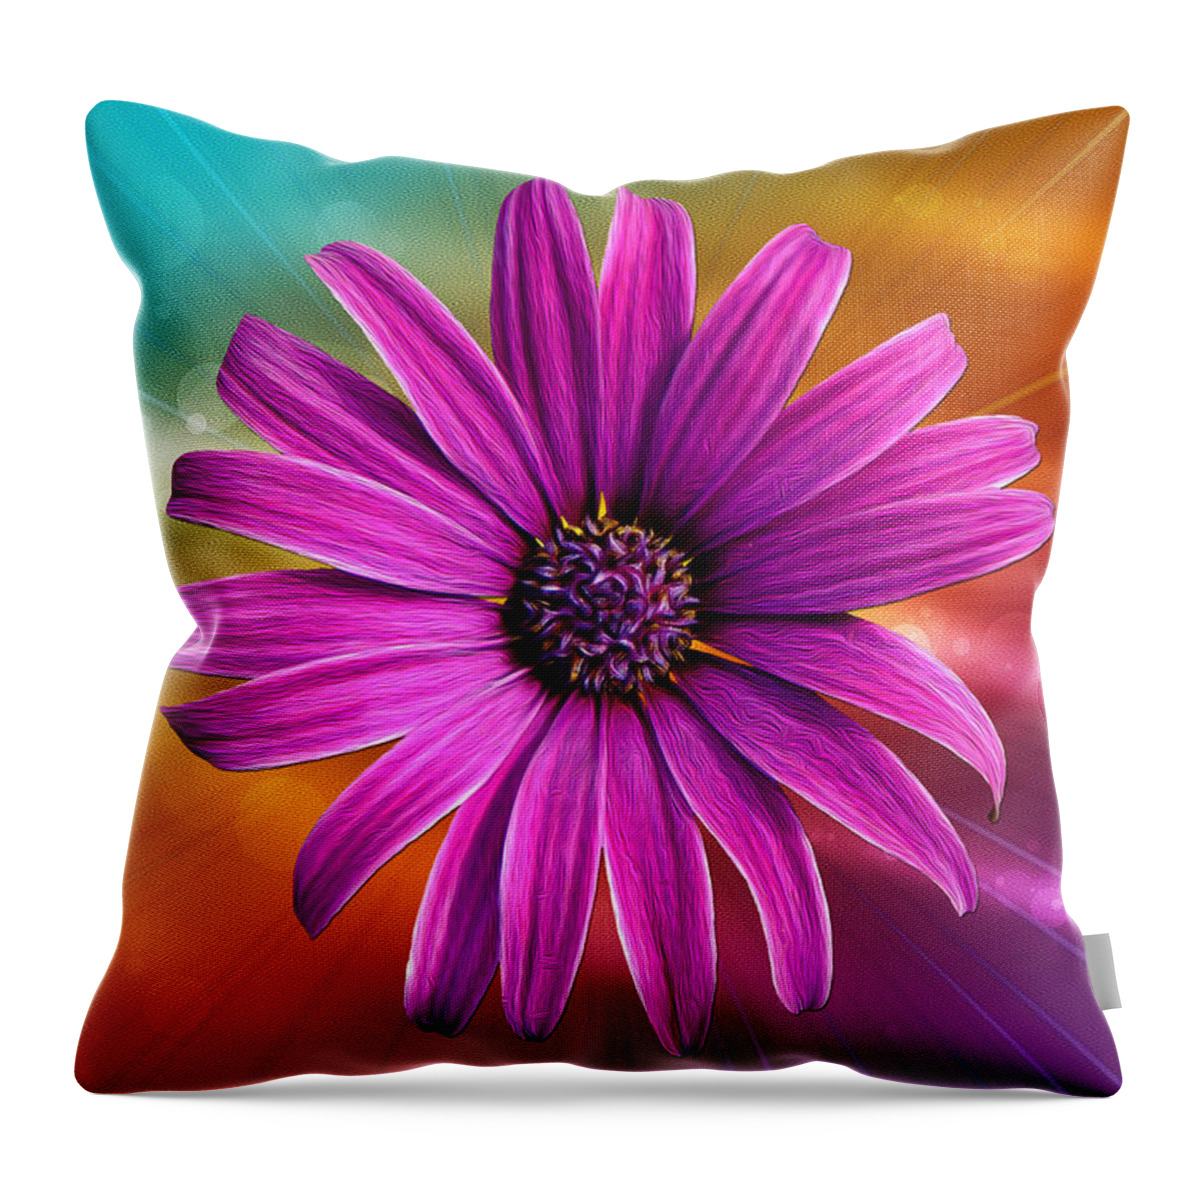 Flower Throw Pillow featuring the photograph Flower Empowered by Bill and Linda Tiepelman